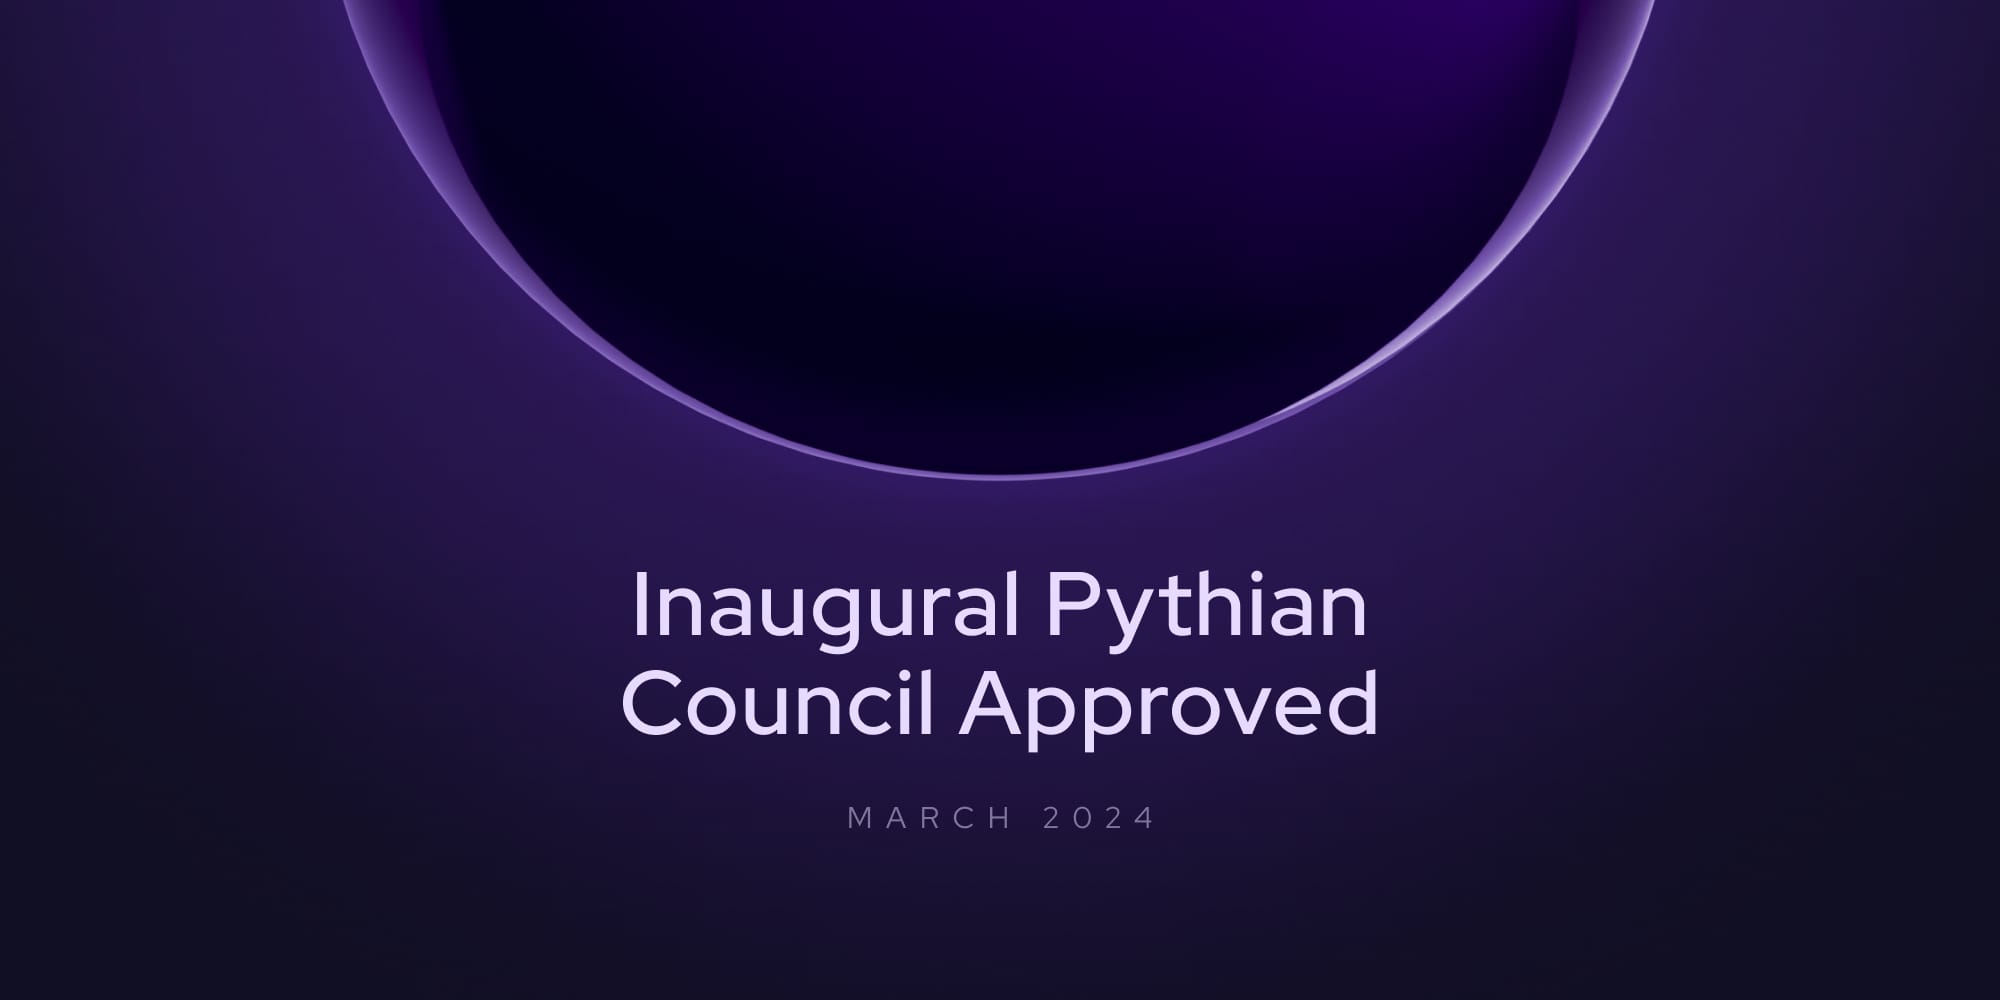 The Launch of the Inaugural Pythian Council | Mar 2024